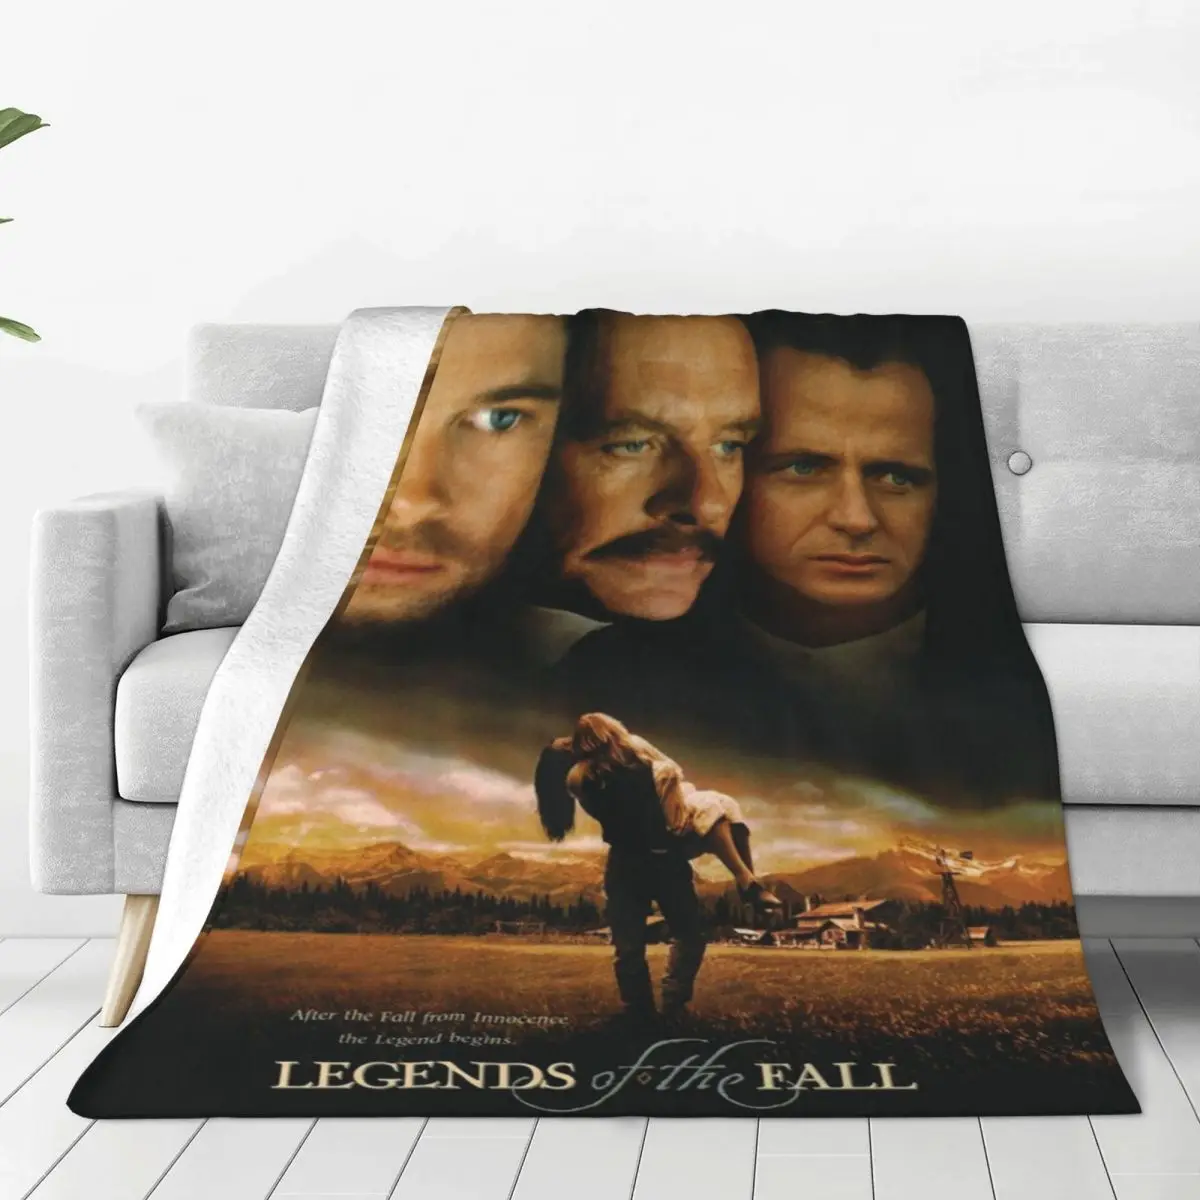 

Legends Of The Fall Flannel Blanket Western Romantic Story Super Warm Throw Blanket for Chair Camping Bedspread Sofa Bed Cover